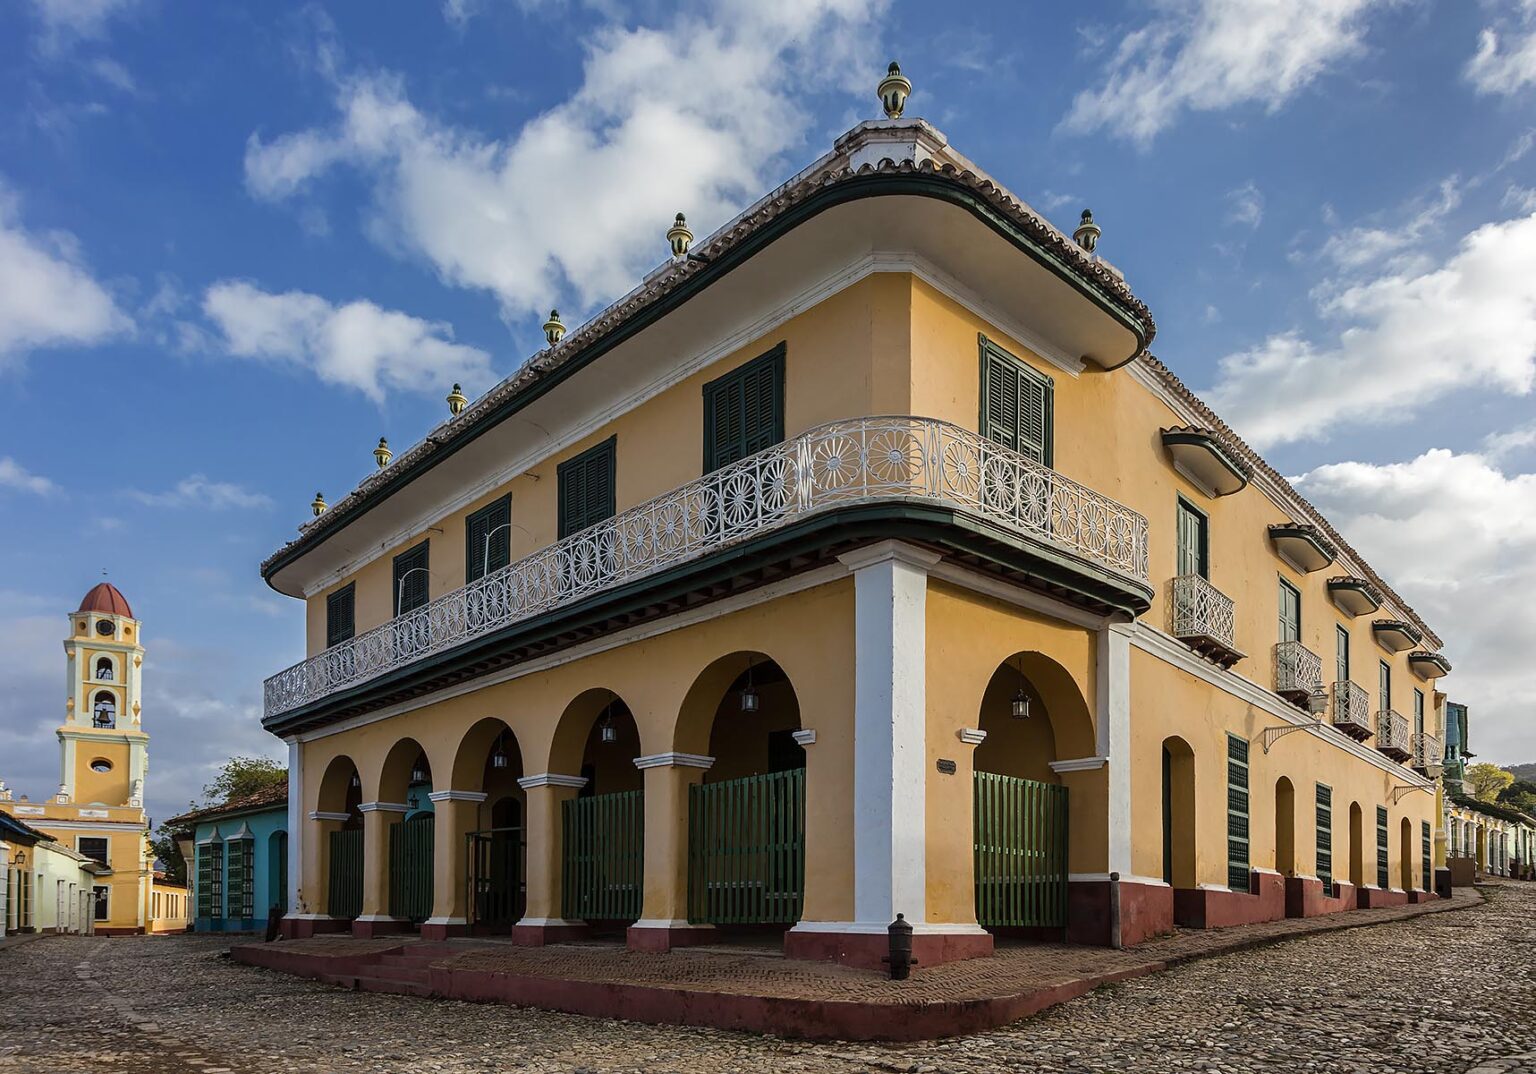 The MUSEO ROMANTICO is housed in the former PALACIO BRUNET on the PLAZA MAYOR - TRINIDAD, CUBA